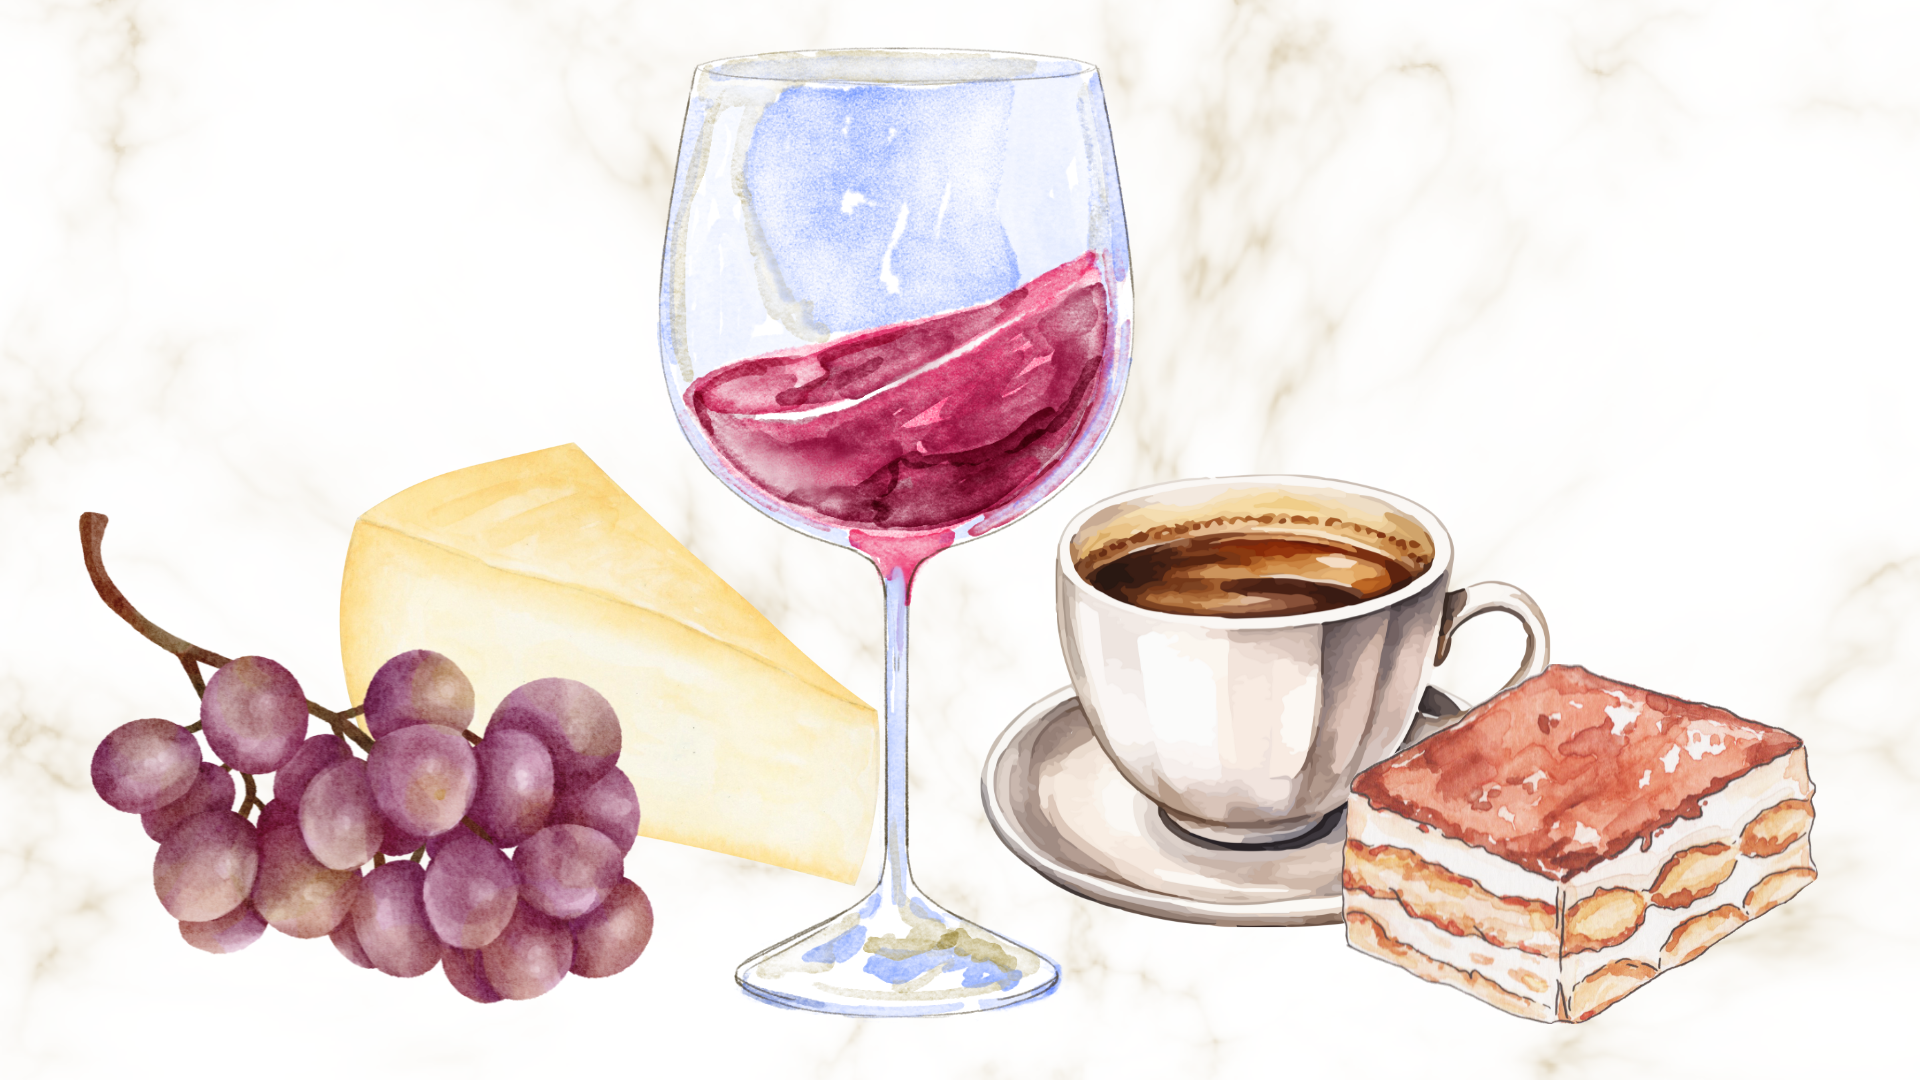 A watercolor image of grapes, cheese, wine, coffee, and a dessert